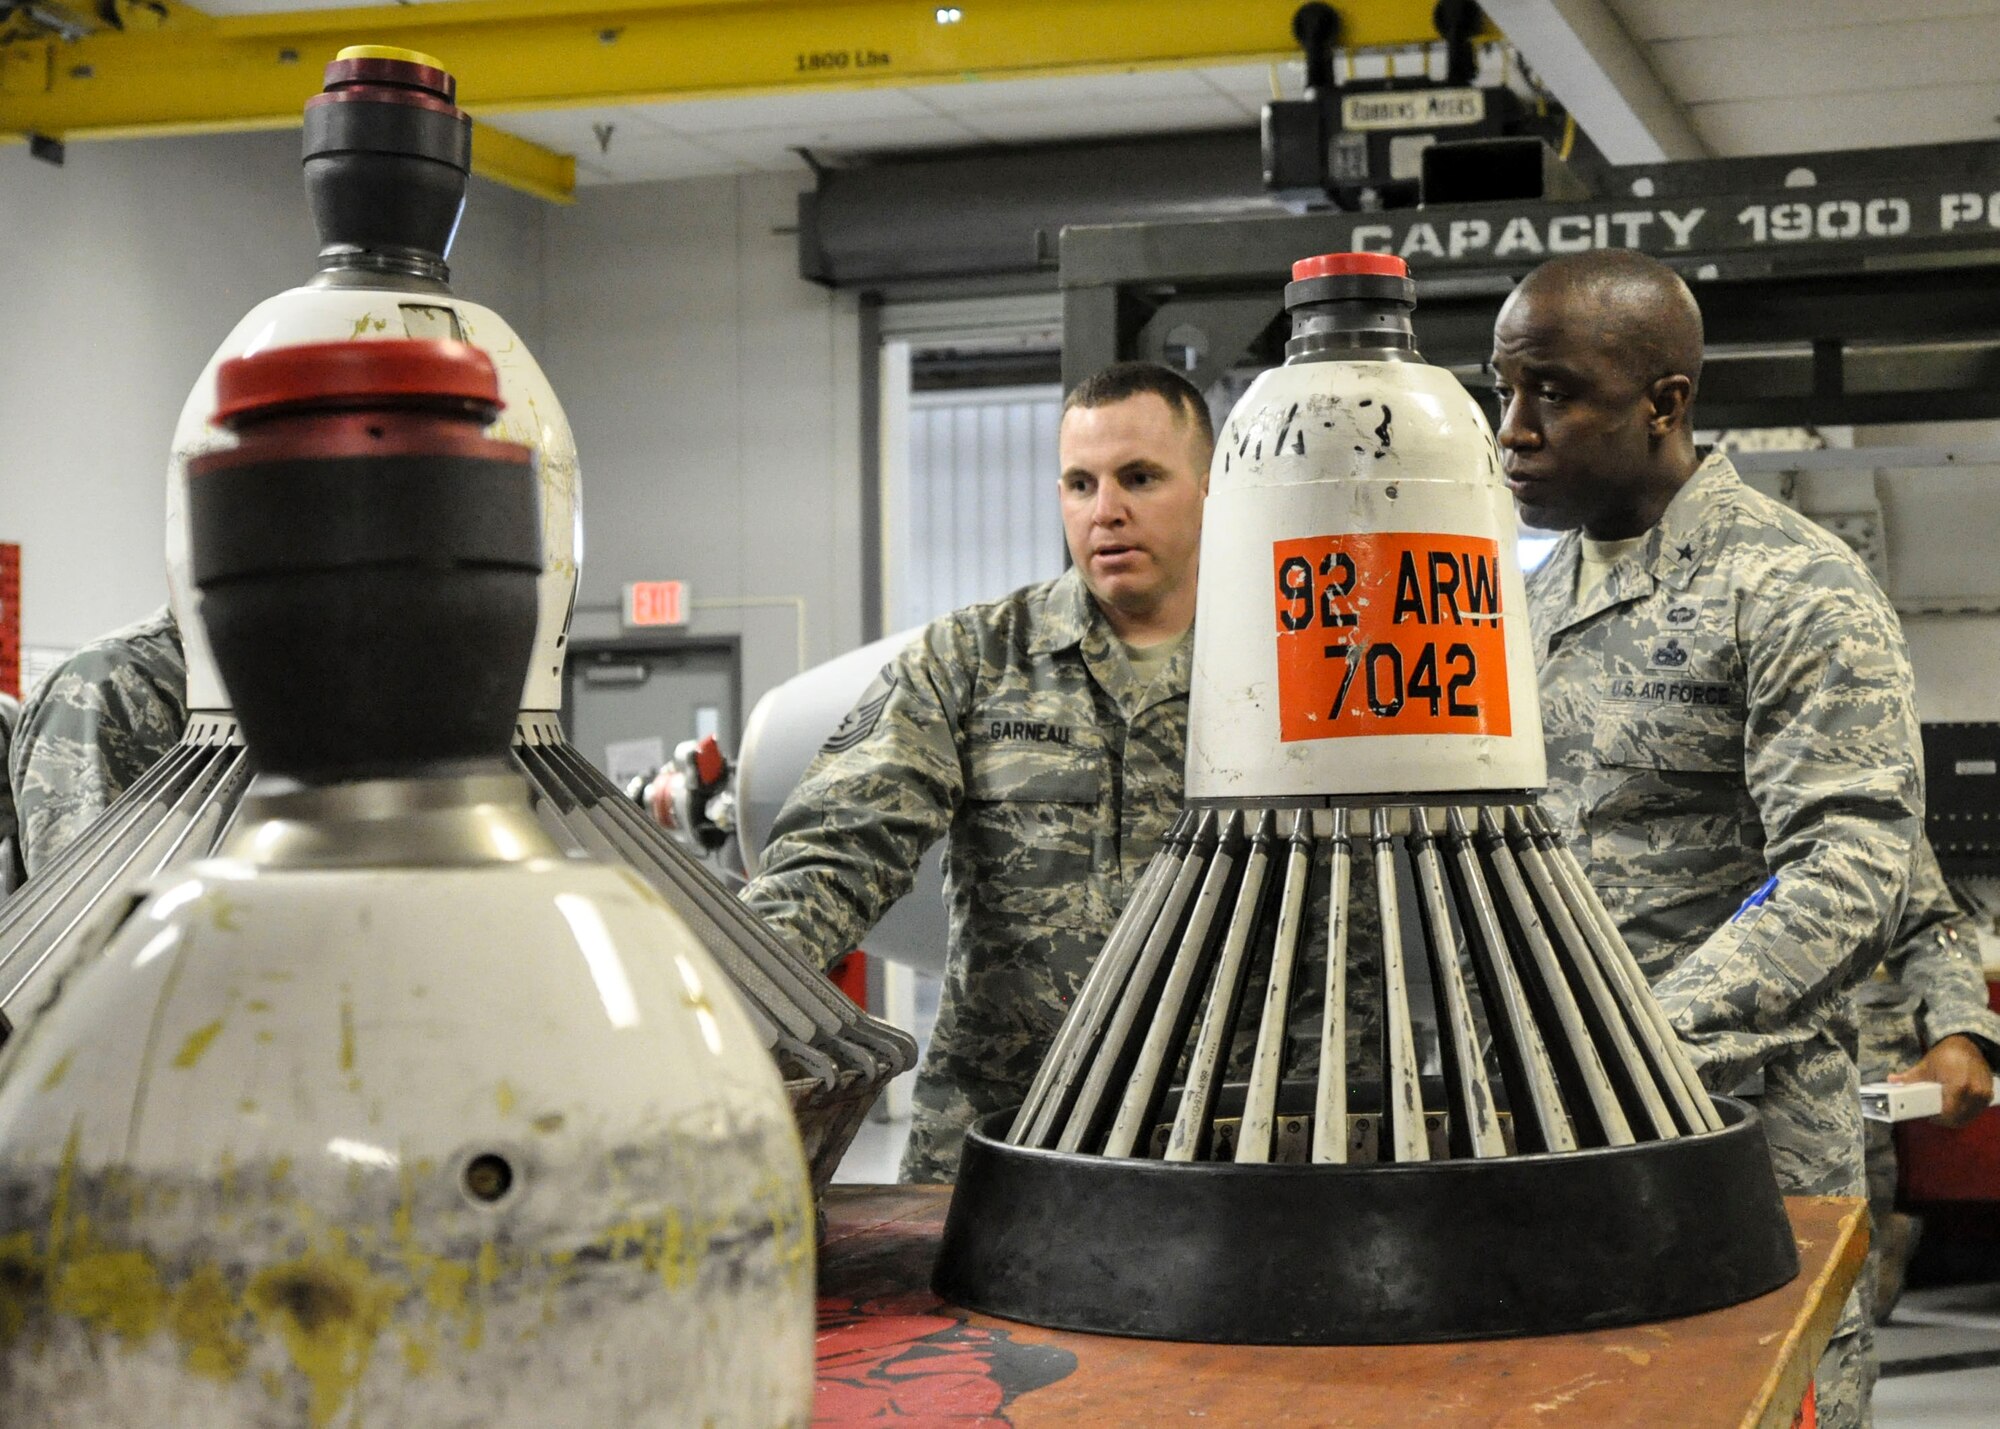 Master Sgt. Dustin Garneau, 92nd Maintenance Squadron NCO in charge of aircraft hydraulics, shows Brig. Gen. Stacey Hawkins, boom pod baskets during a base tour Nov. 7, 2016, at Fairchild Air Force Base, Wash. Hawkins, who is the Air Mobility Command director of logistics, engineering and force protection, spoke with Airmen around the base to see what their needs were, so he could plan to assist them at the AMC level. (U.S. Air Force photo/Airman 1st Class Taylor Shelton)